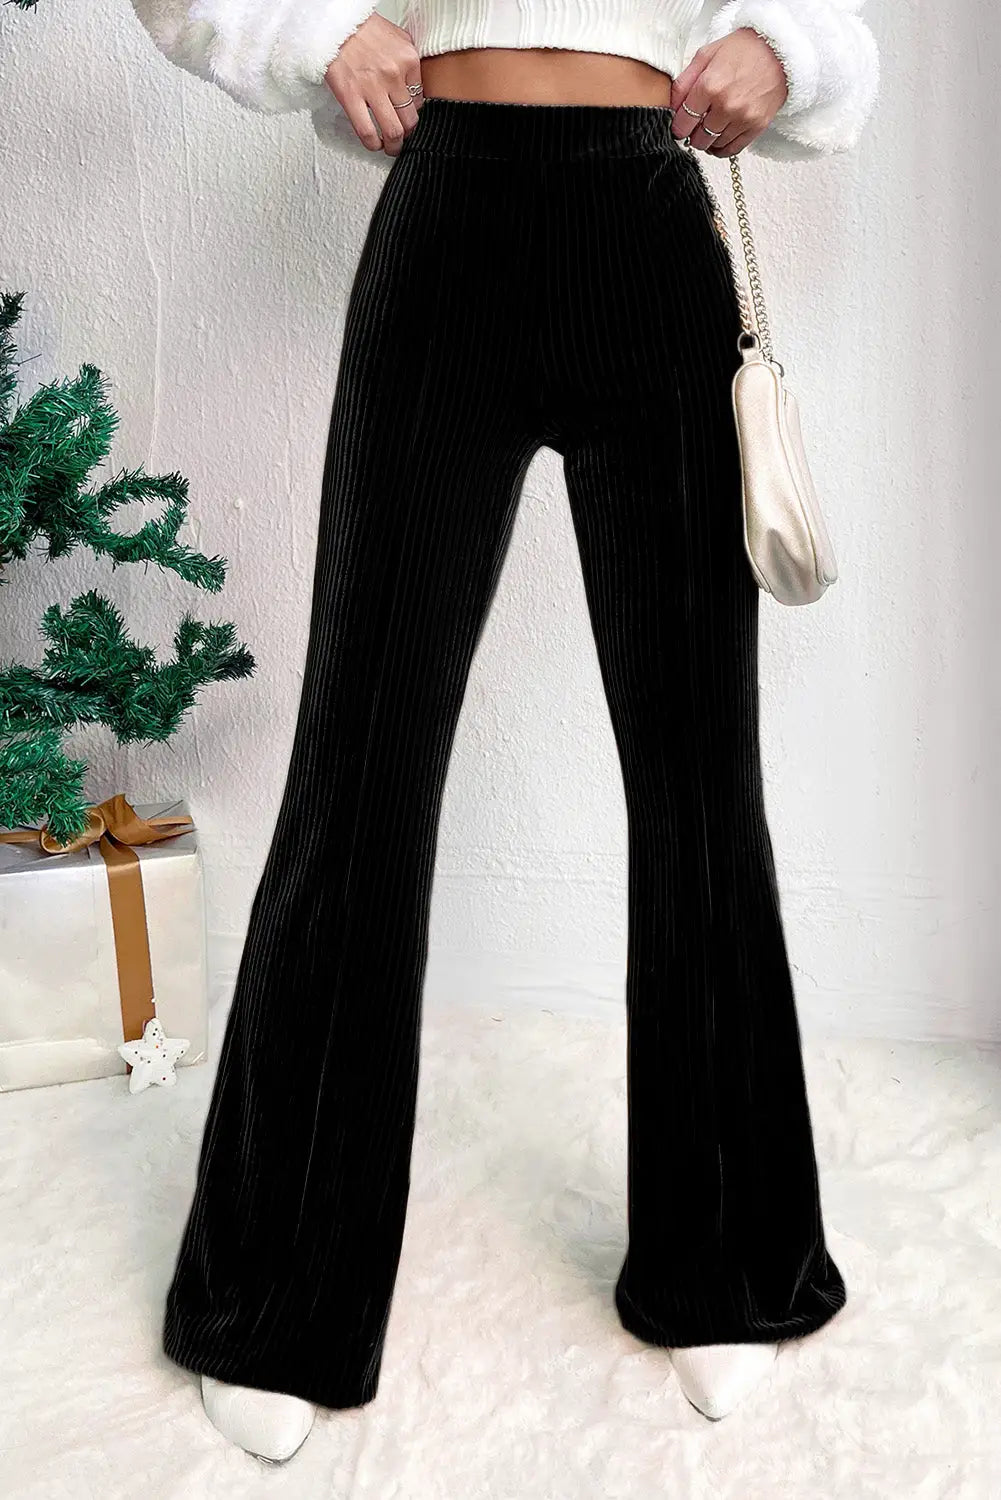 Dusty pink solid color high waist flare corduroy pants - black / s / 90% polyester + 10% elastane - bottoms